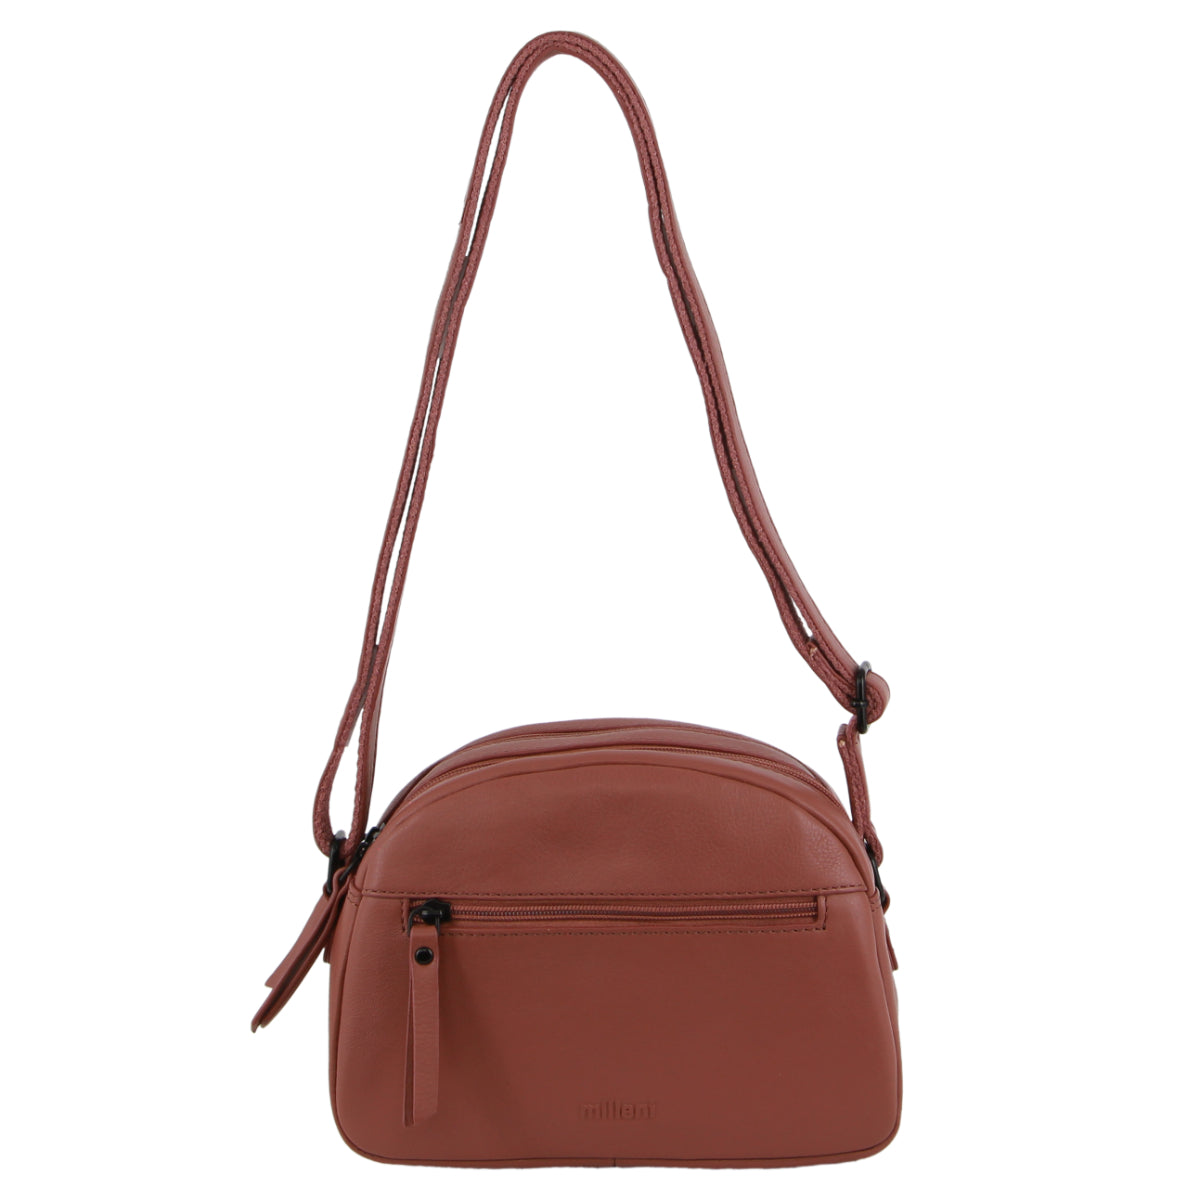 Milleni - NL3869 Small rounded leather sidebag - Rose-1